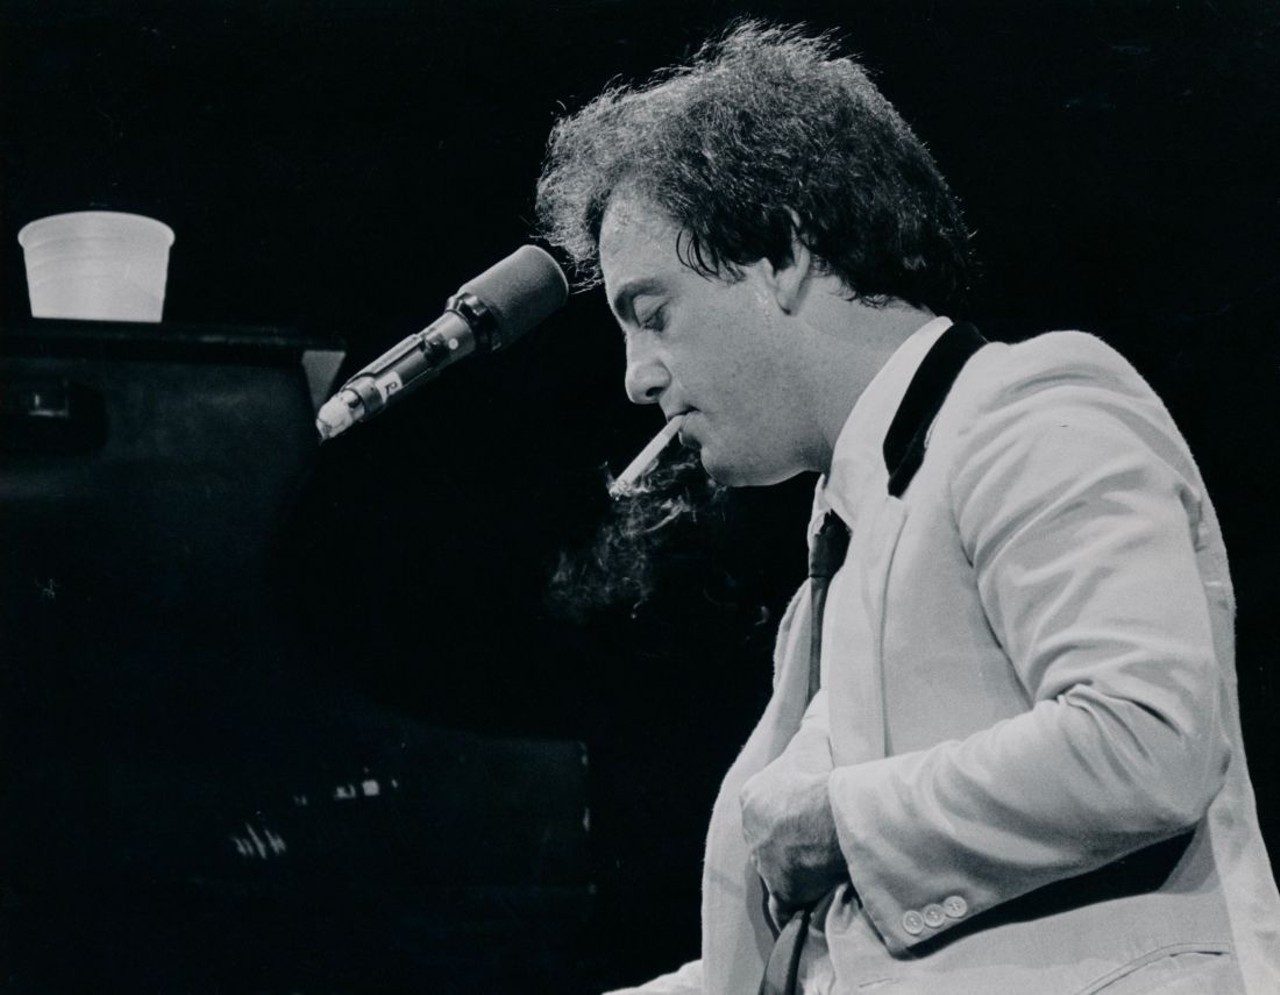 Billy Joel at the Richfield Coliseum in 1982